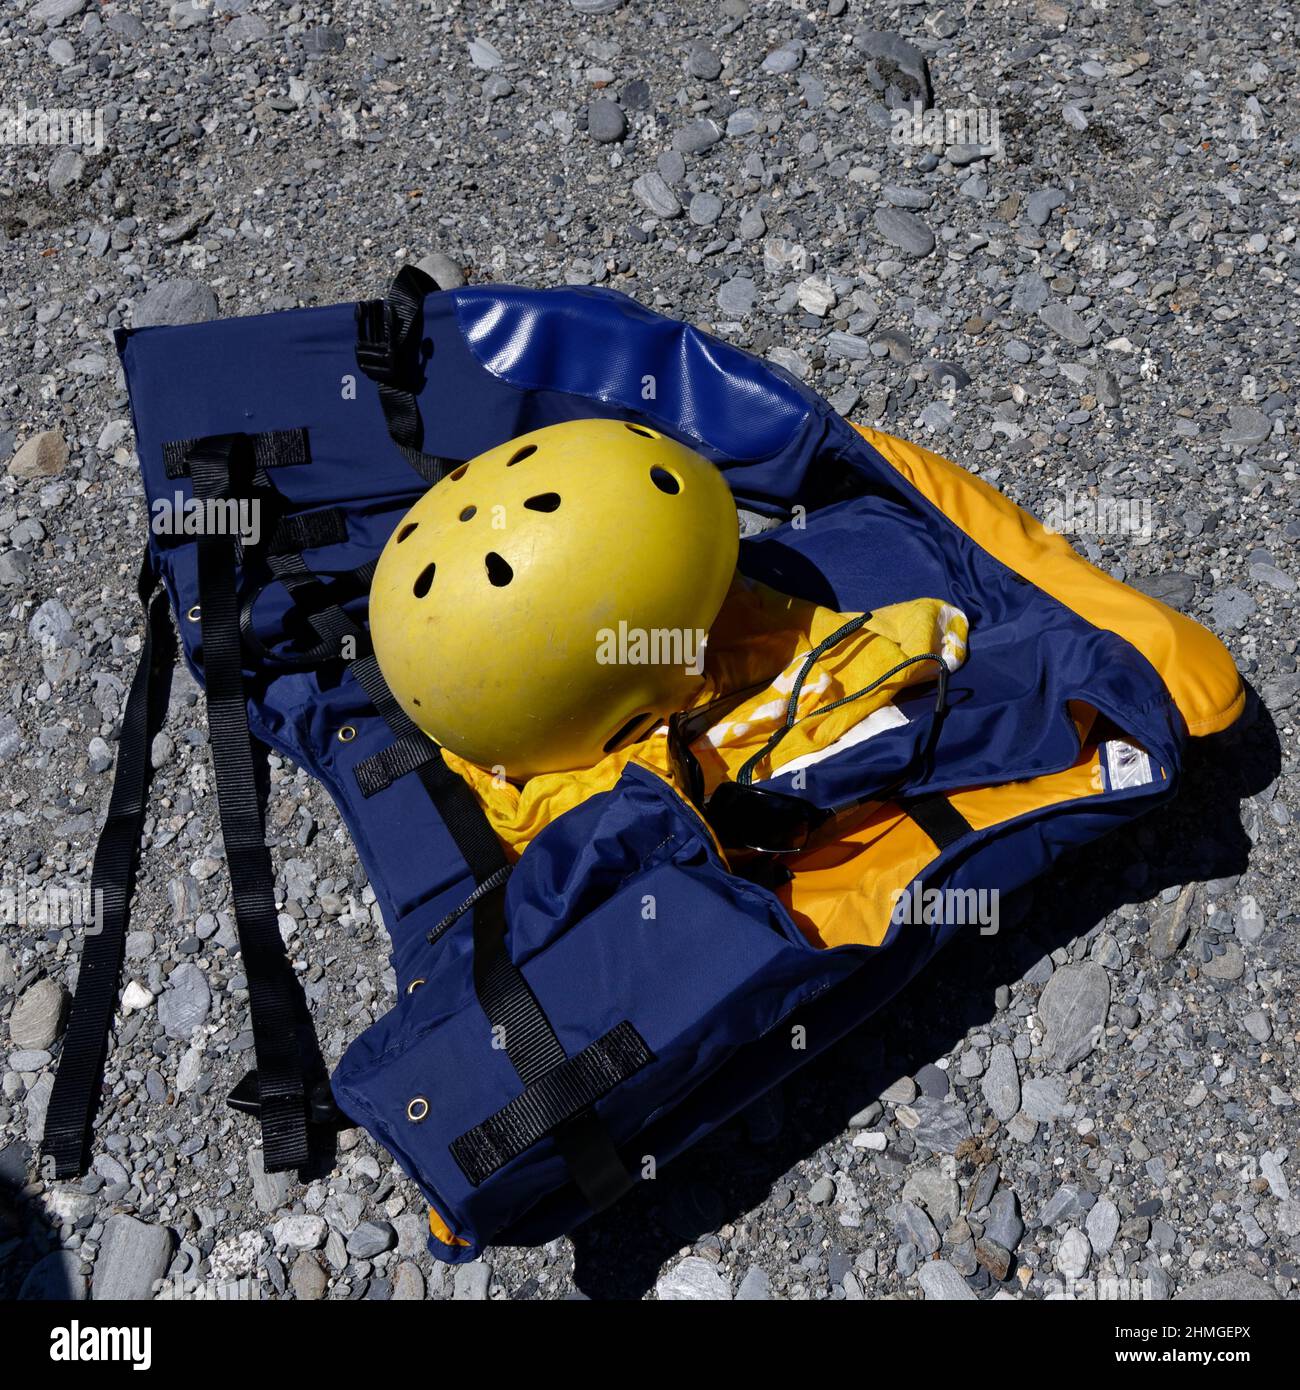 A yellow rafting helmet is on top of a life jacket on a stony river bed. Stock Photo